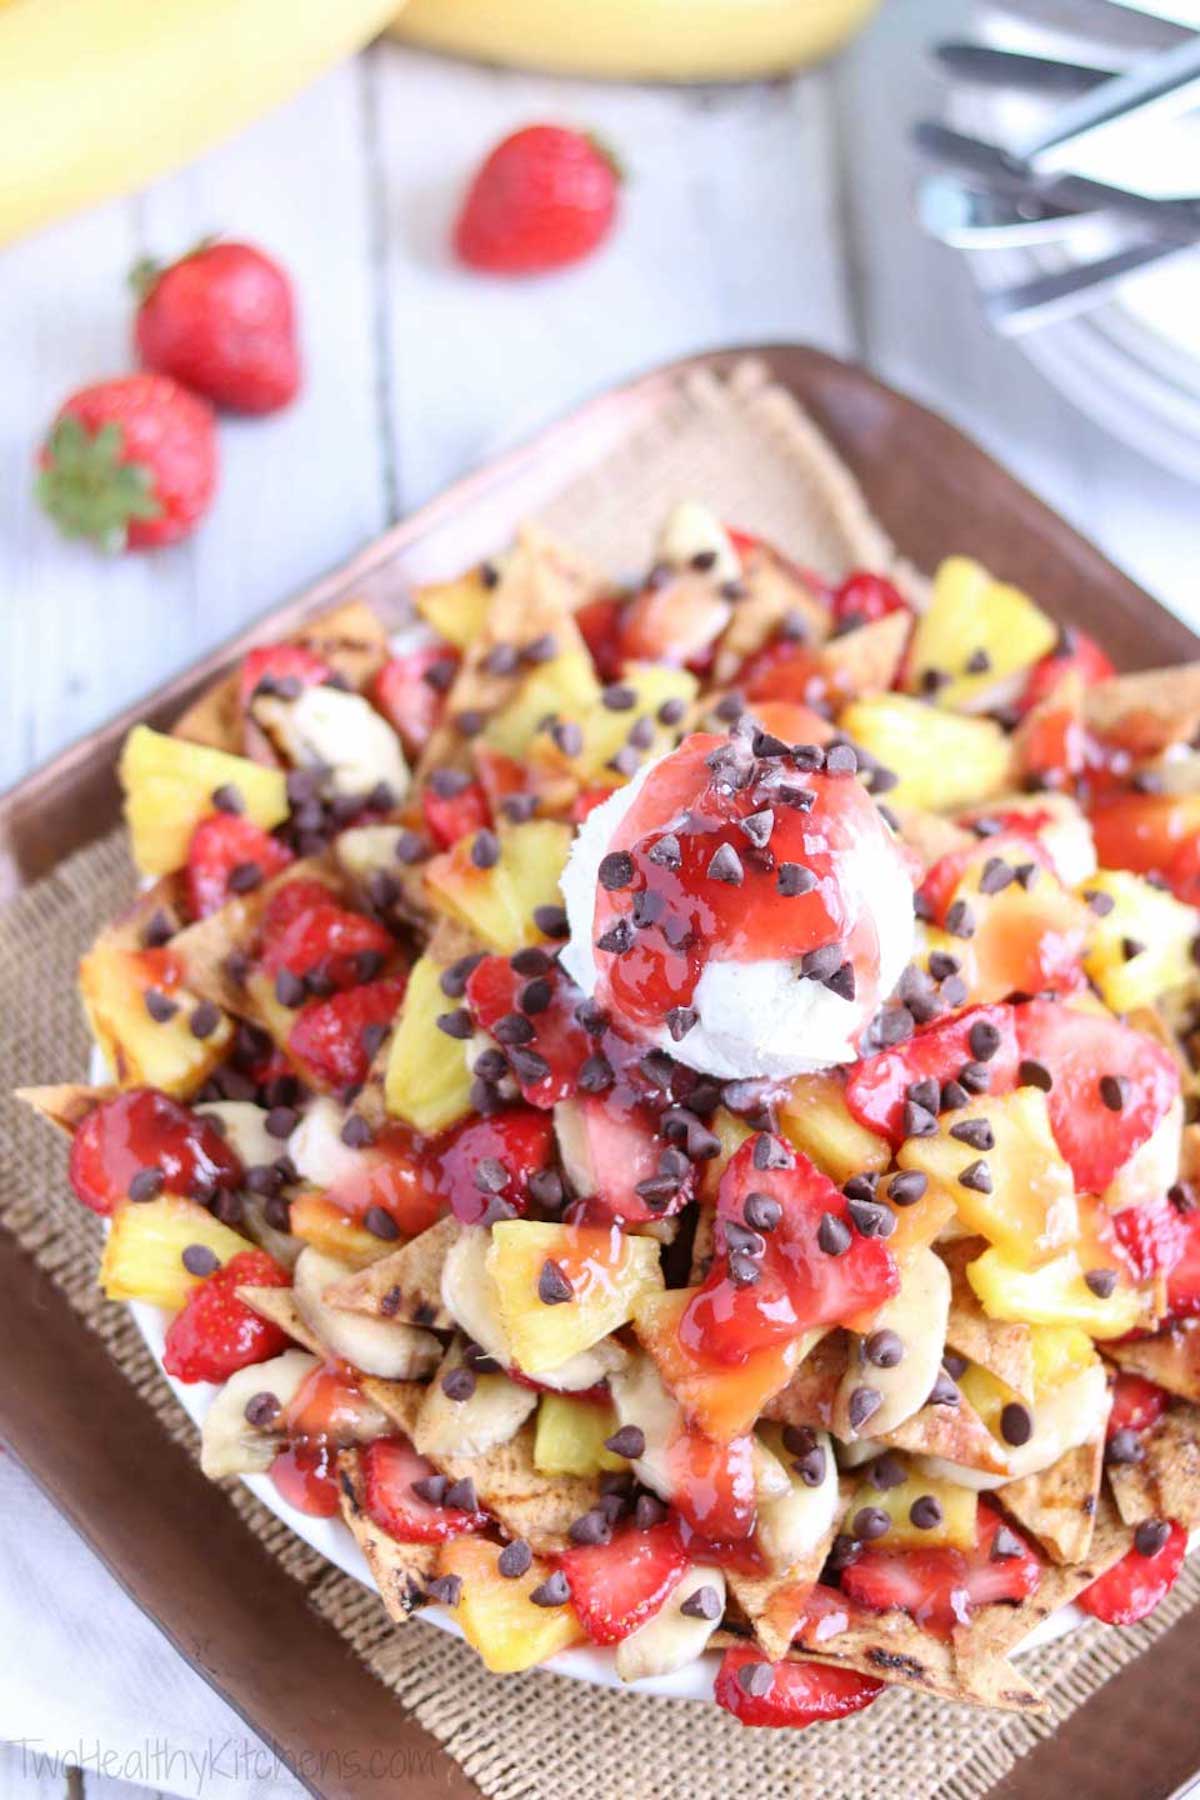 Overhead view of a tray of dessert nachos covered in grilled strawberries, grilled bananas, and chocolate chips - then topped with a scoop of vanilla ice cream.